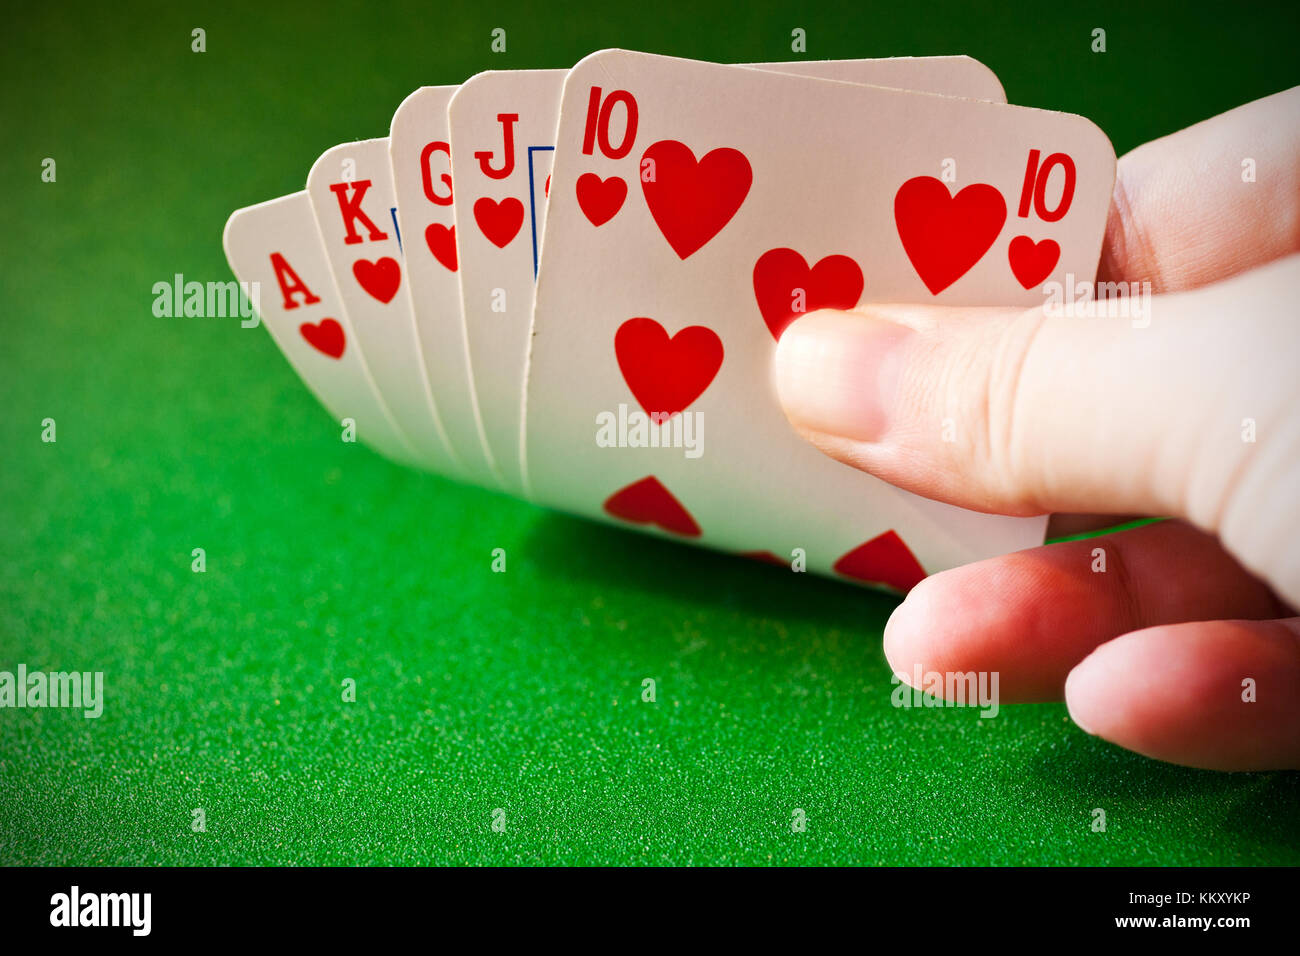 playing cards / player hand with cards Stock Photo